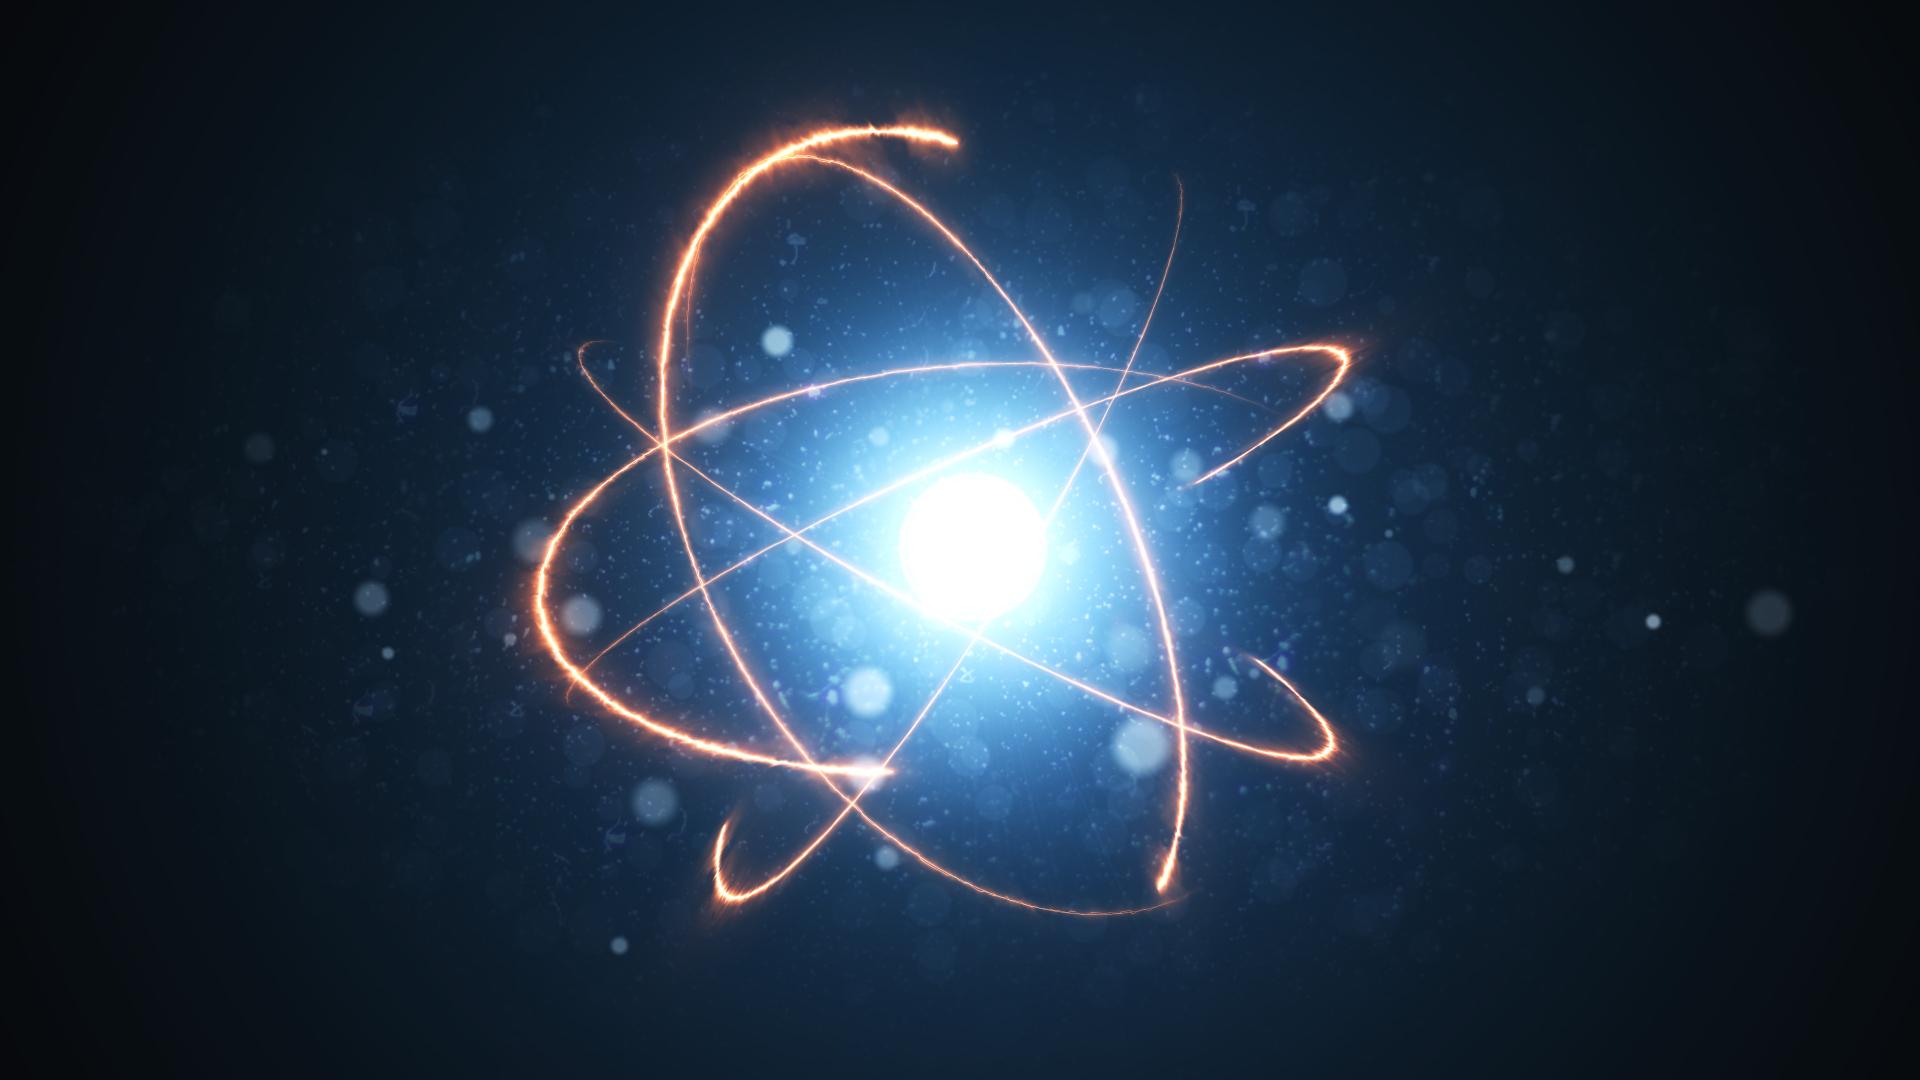 Protons: The essential building blocks of atoms